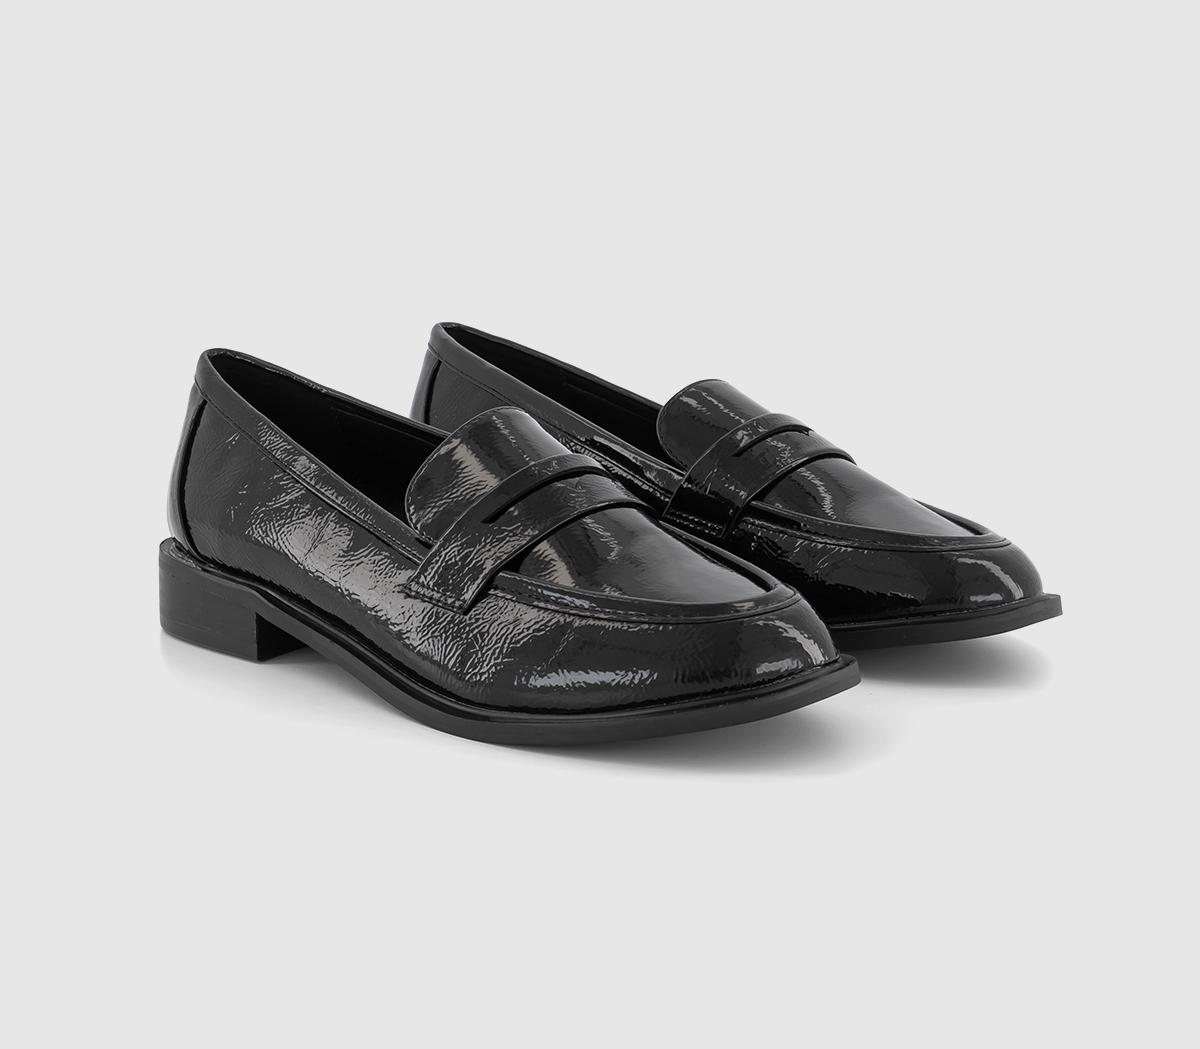 OFFICE Flaming Penny Loafers Black Patent, 4